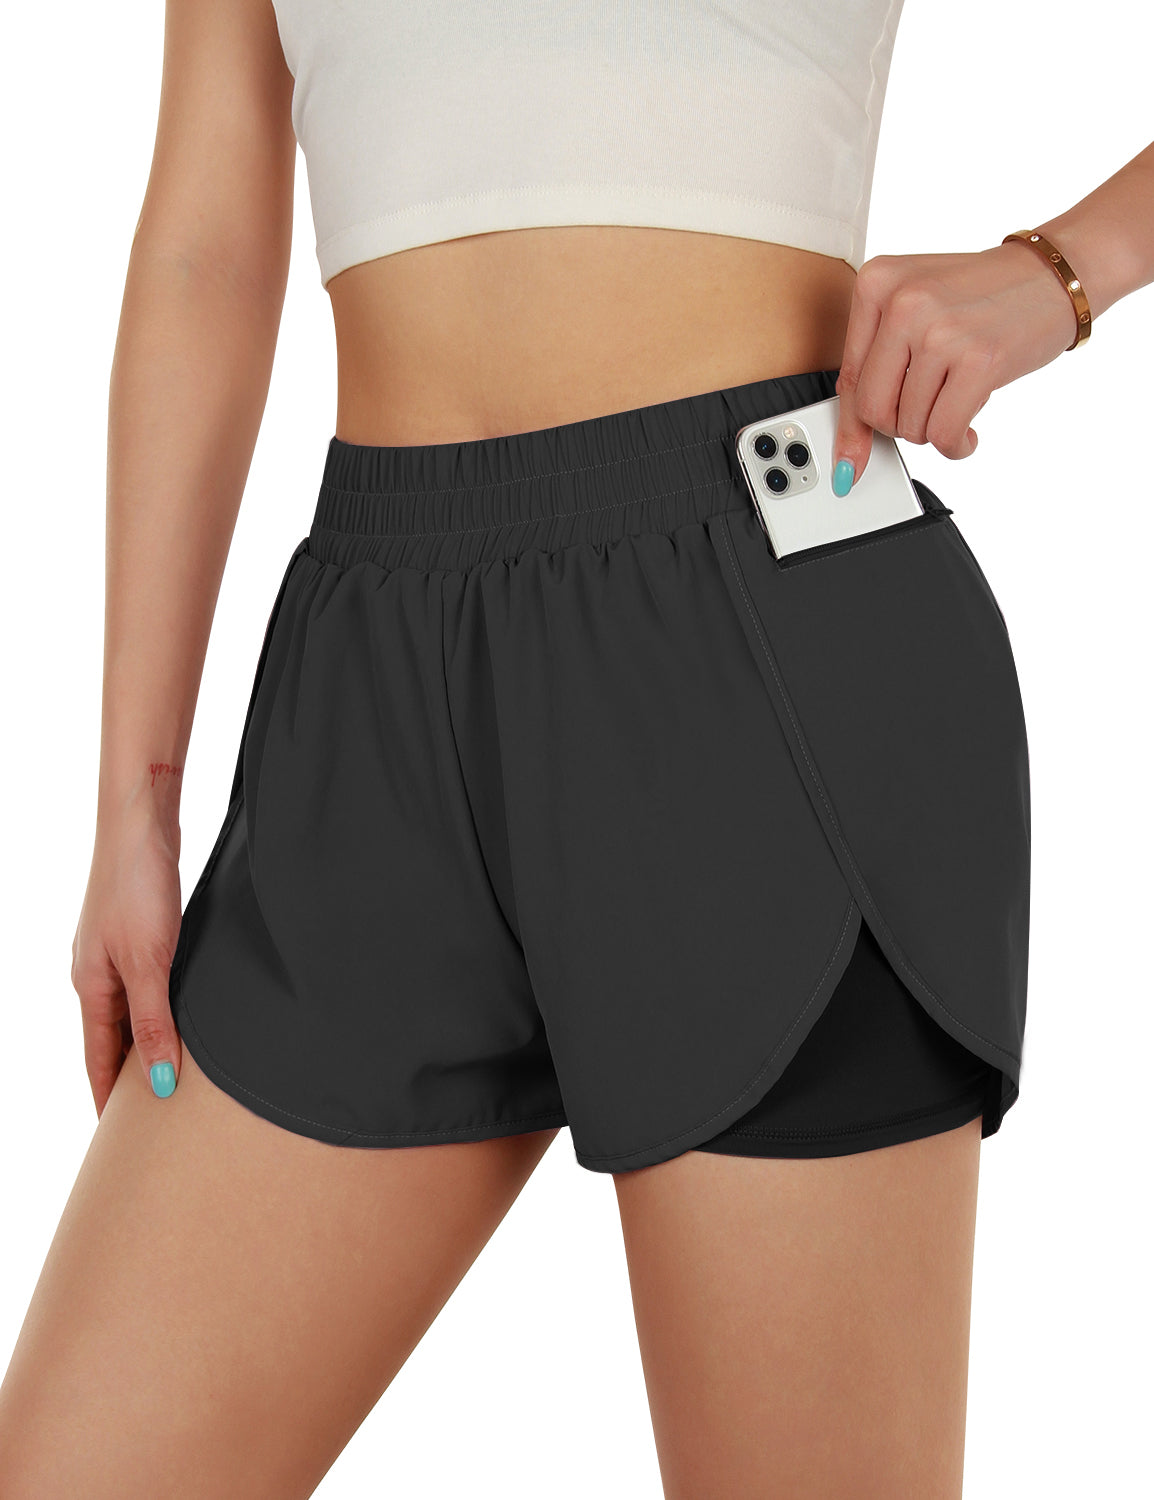 Blooming Jelly Shorts Women's Elastic Wasited Running Shorts Gym Outfits